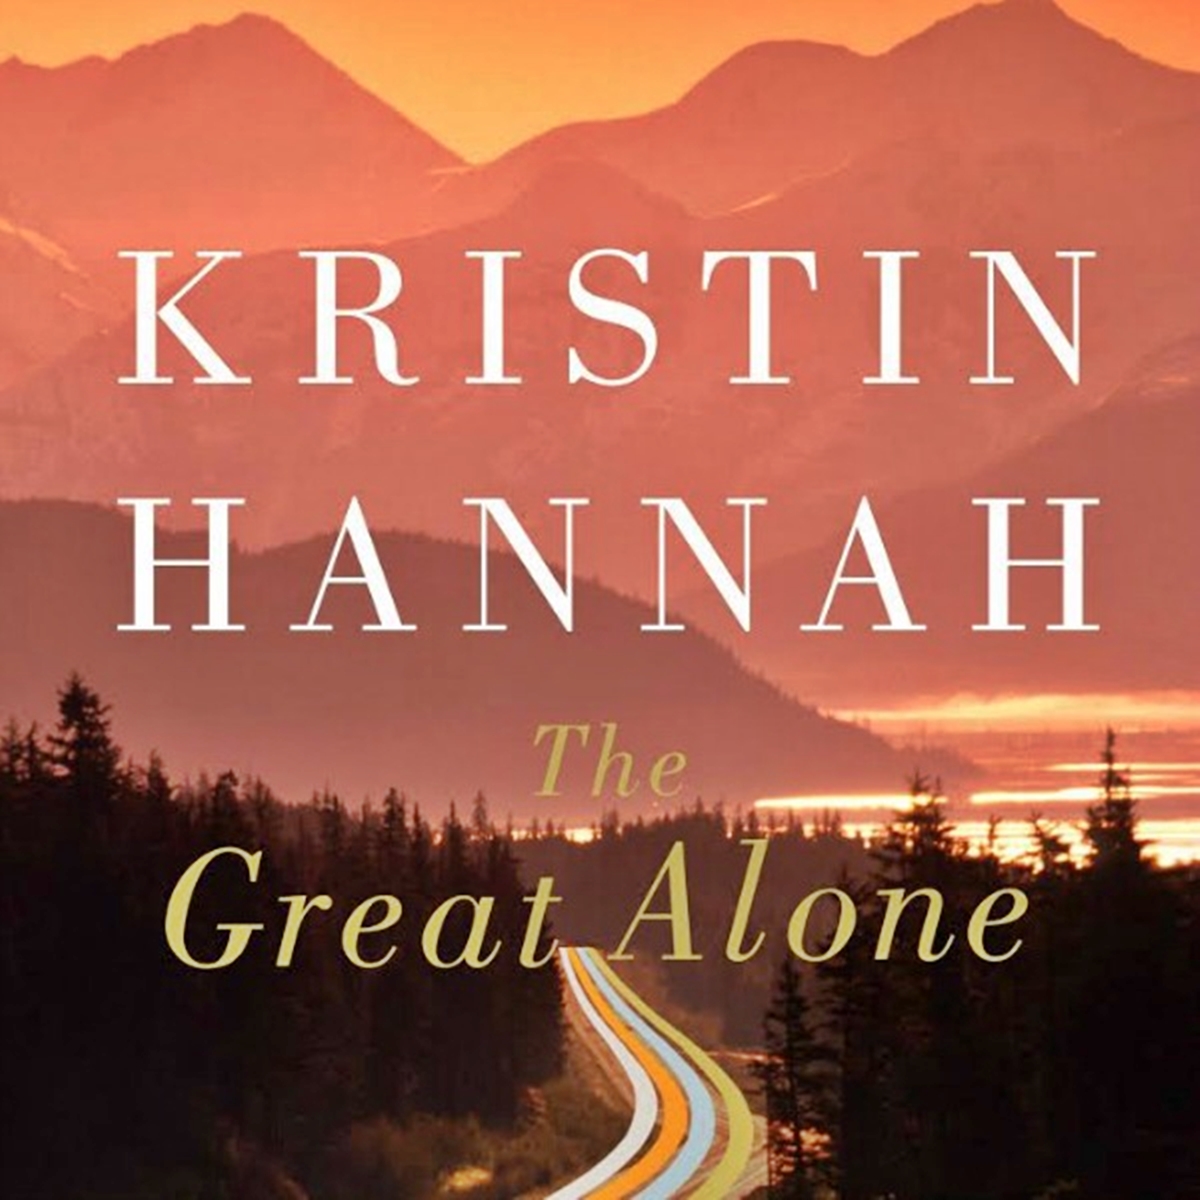 14 Amazing The Great Alone Kristin Hannah Kindle for 2023